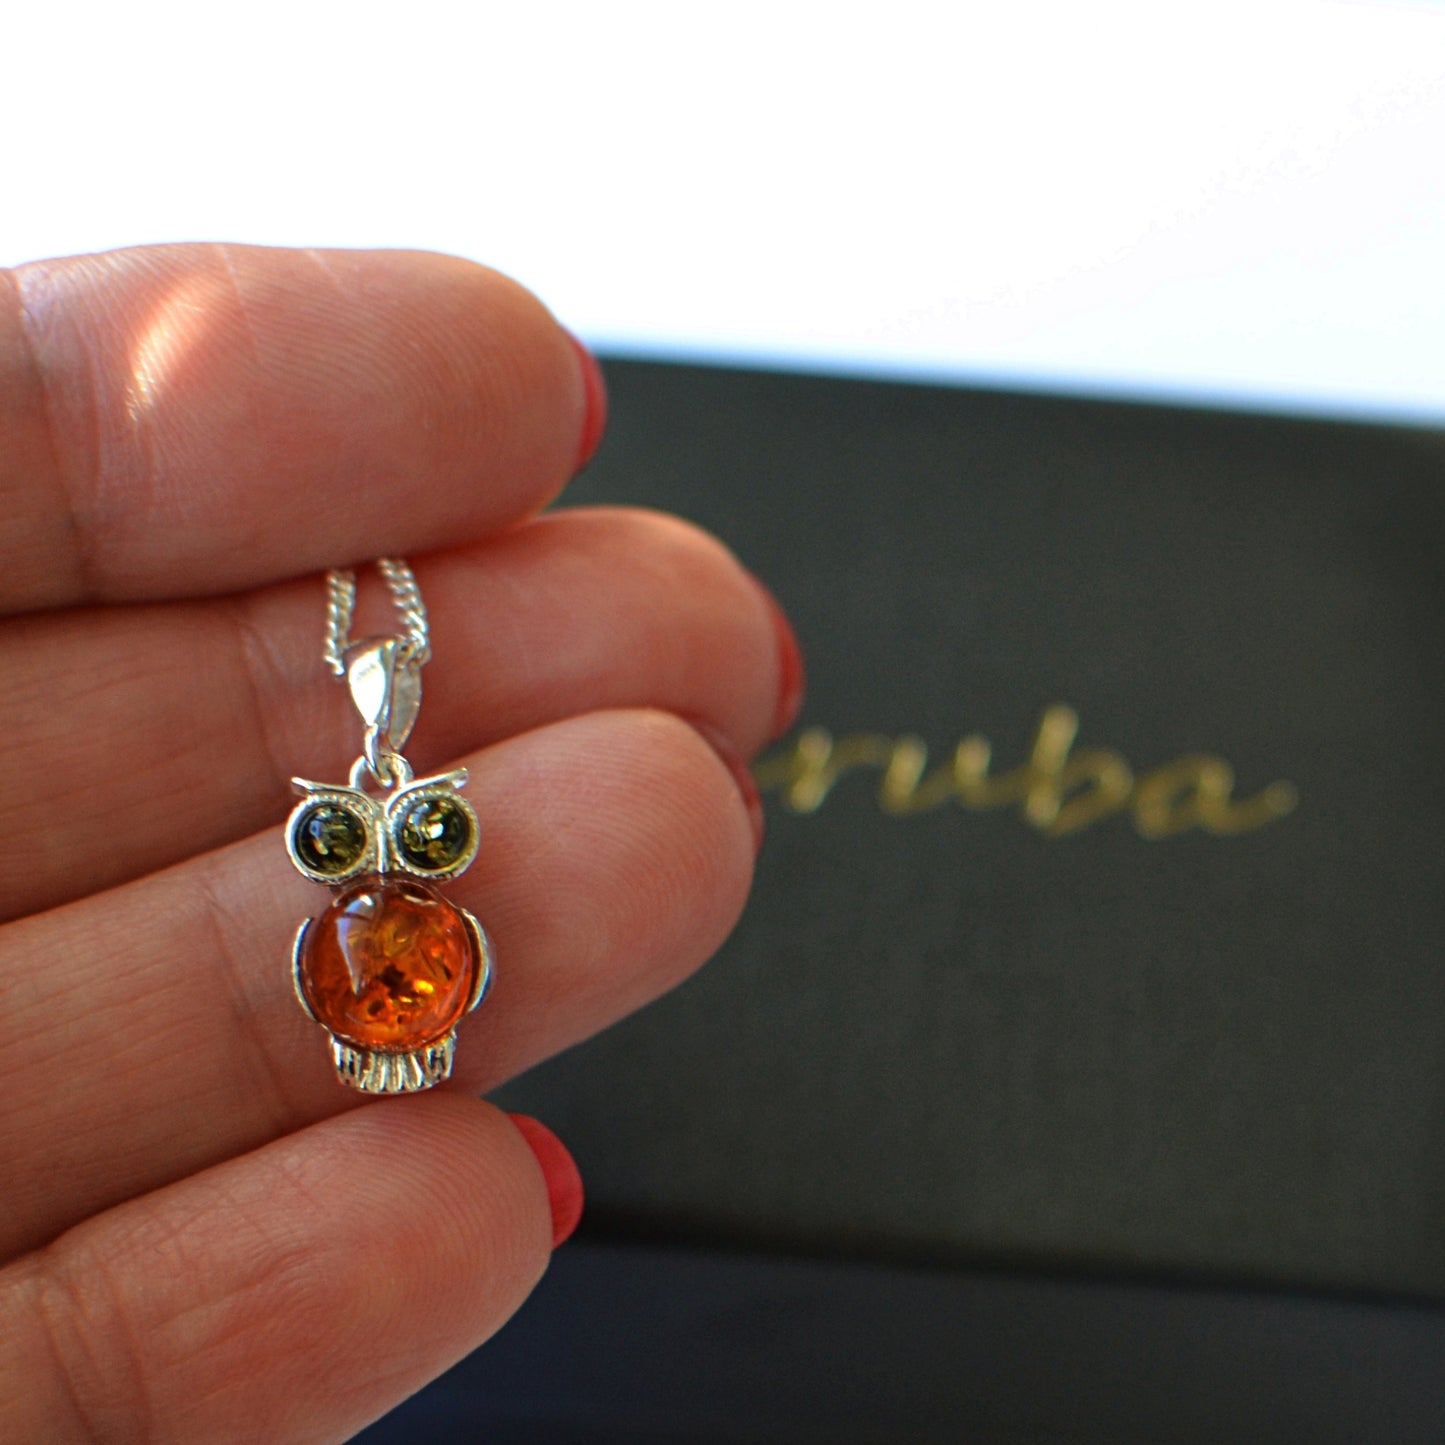 Little Silver Owl pendant with Amber